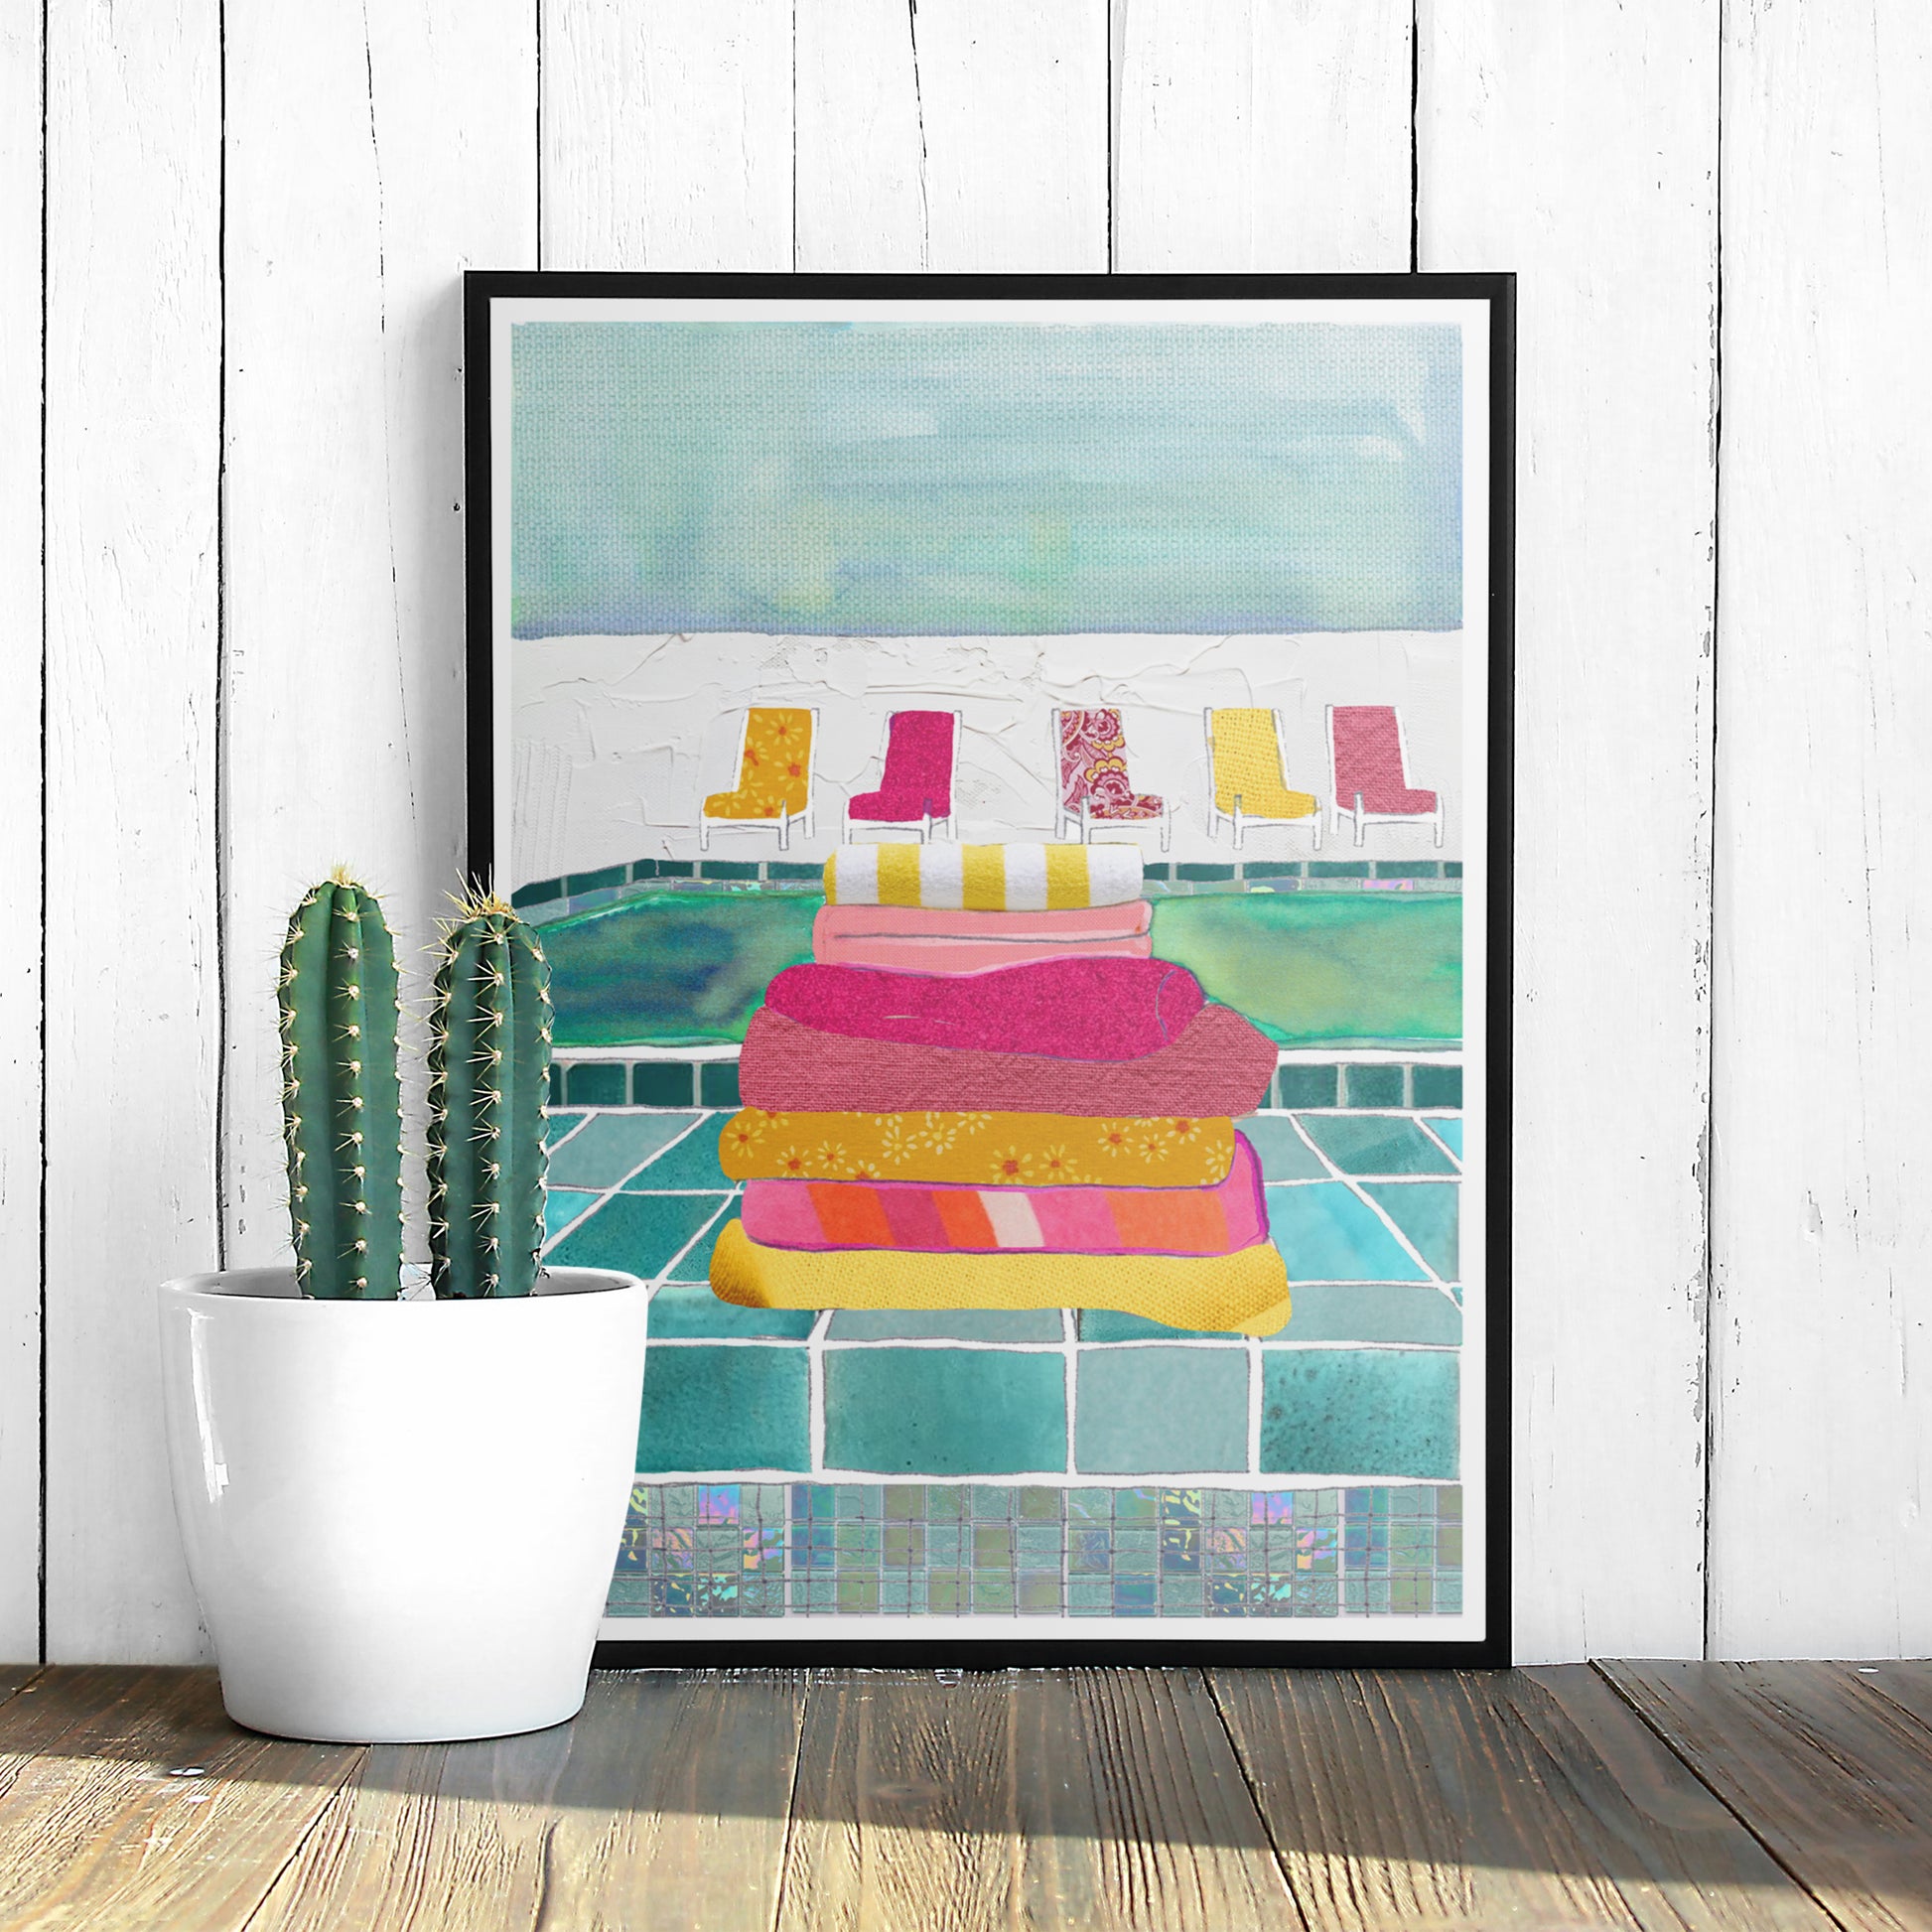 Framed illustration of a poolside featuring a stack of colourful towels and some chairs.